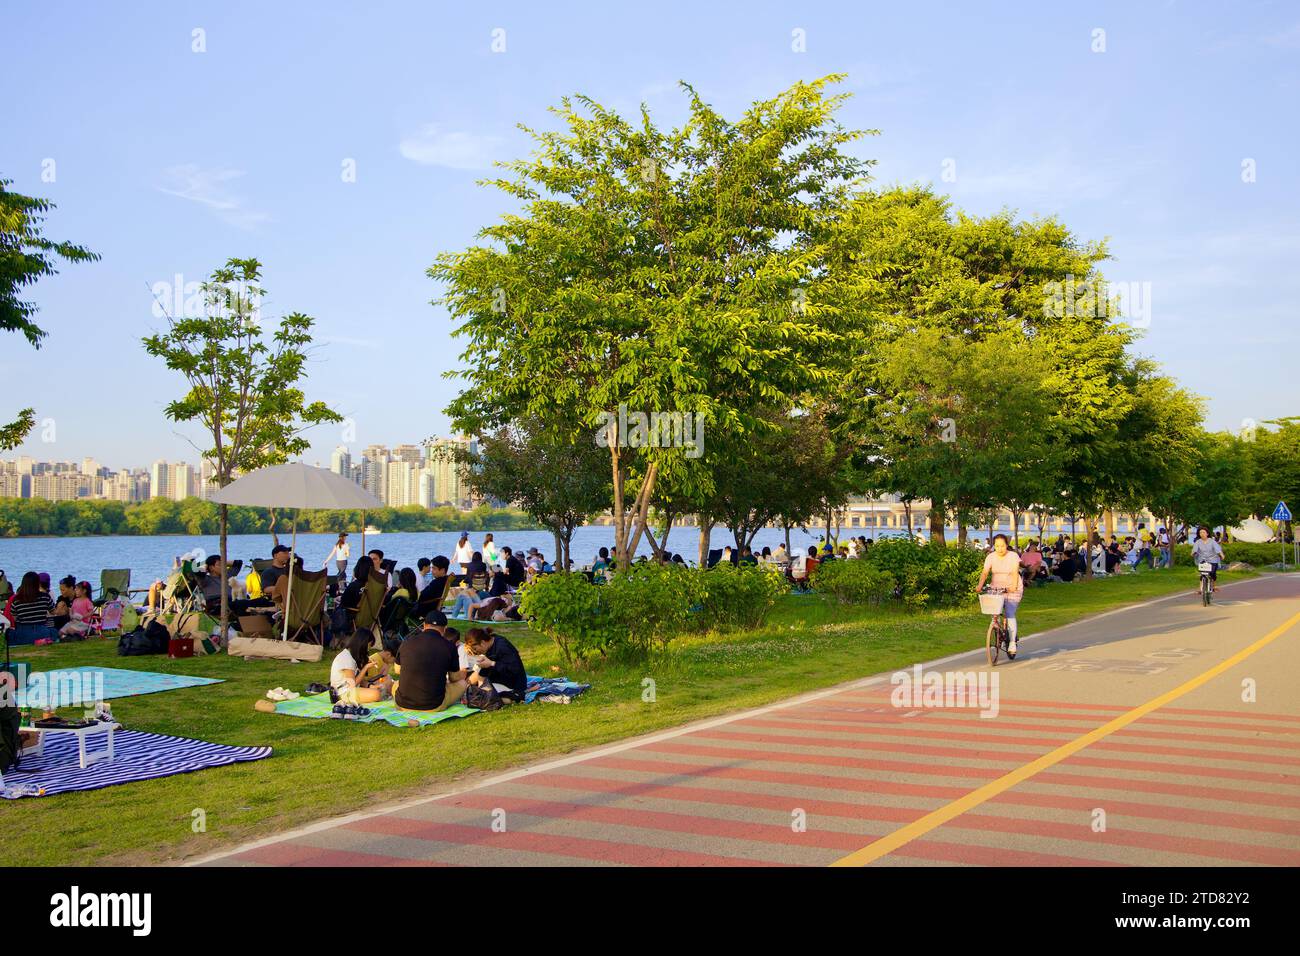 Seoul, South Korea - June 3, 2023: Picnickers enjoying a day on the lawn next to the Han River in Yeouido Hangang Park, with green trees in the foregr Stock Photo